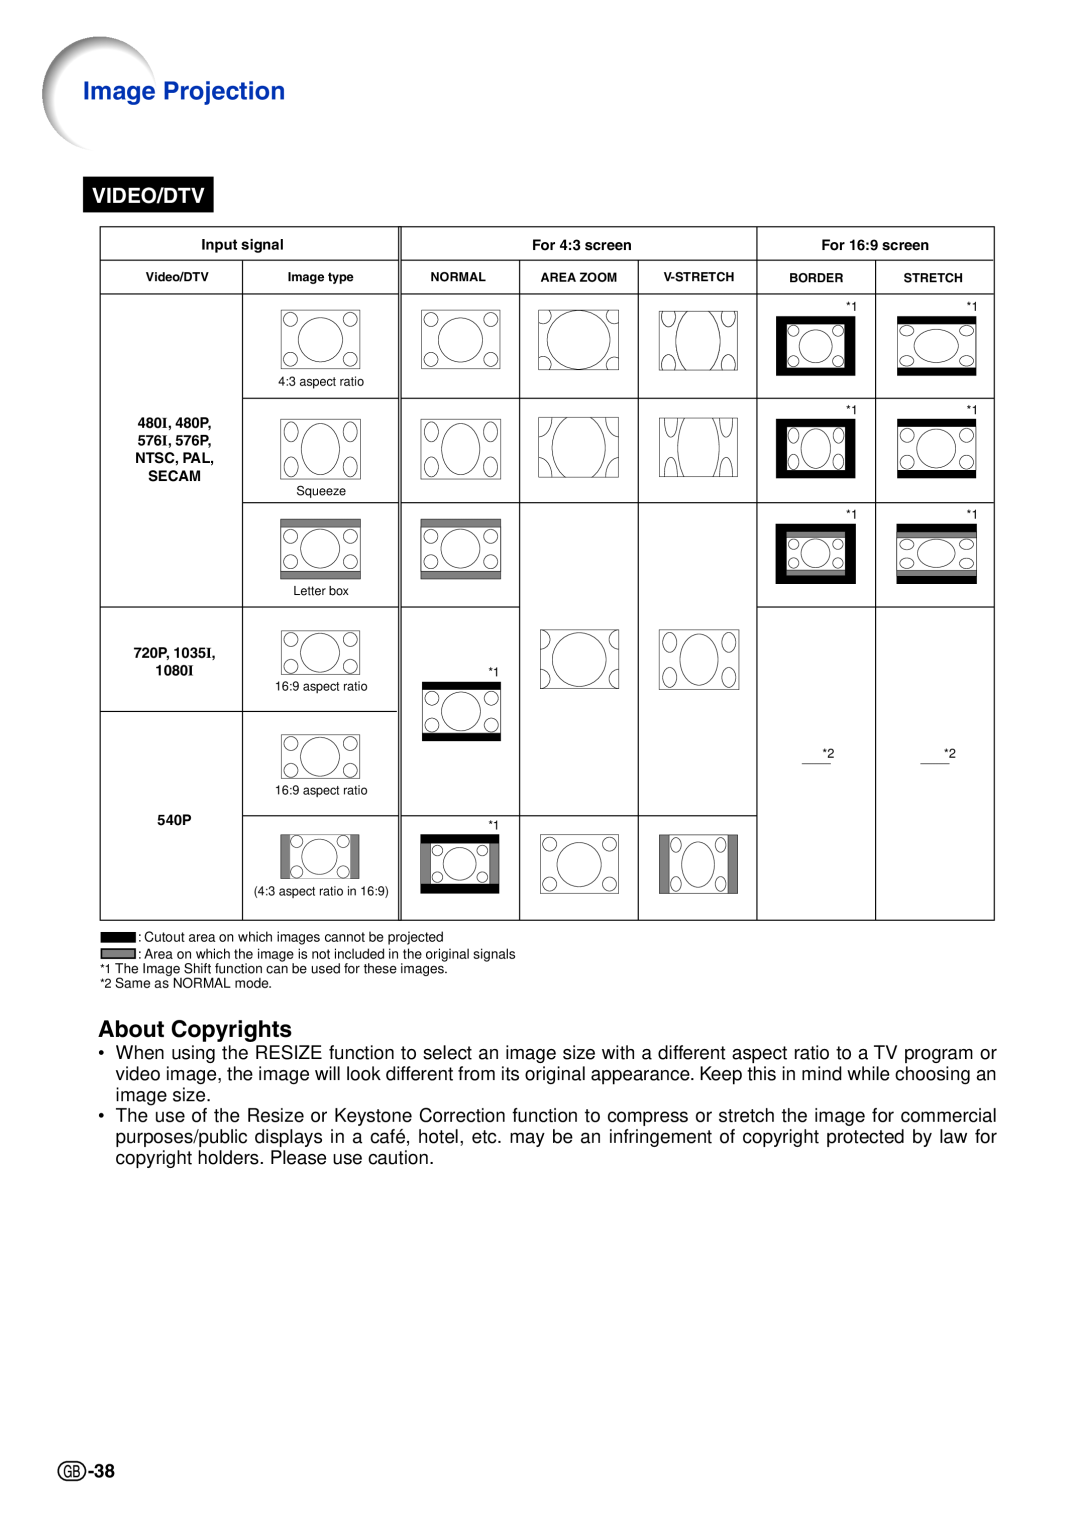 Sharp XG-C465X-L, XG-C435X-L operation manual About Copyrights, Video/Dtv, Image Projection 